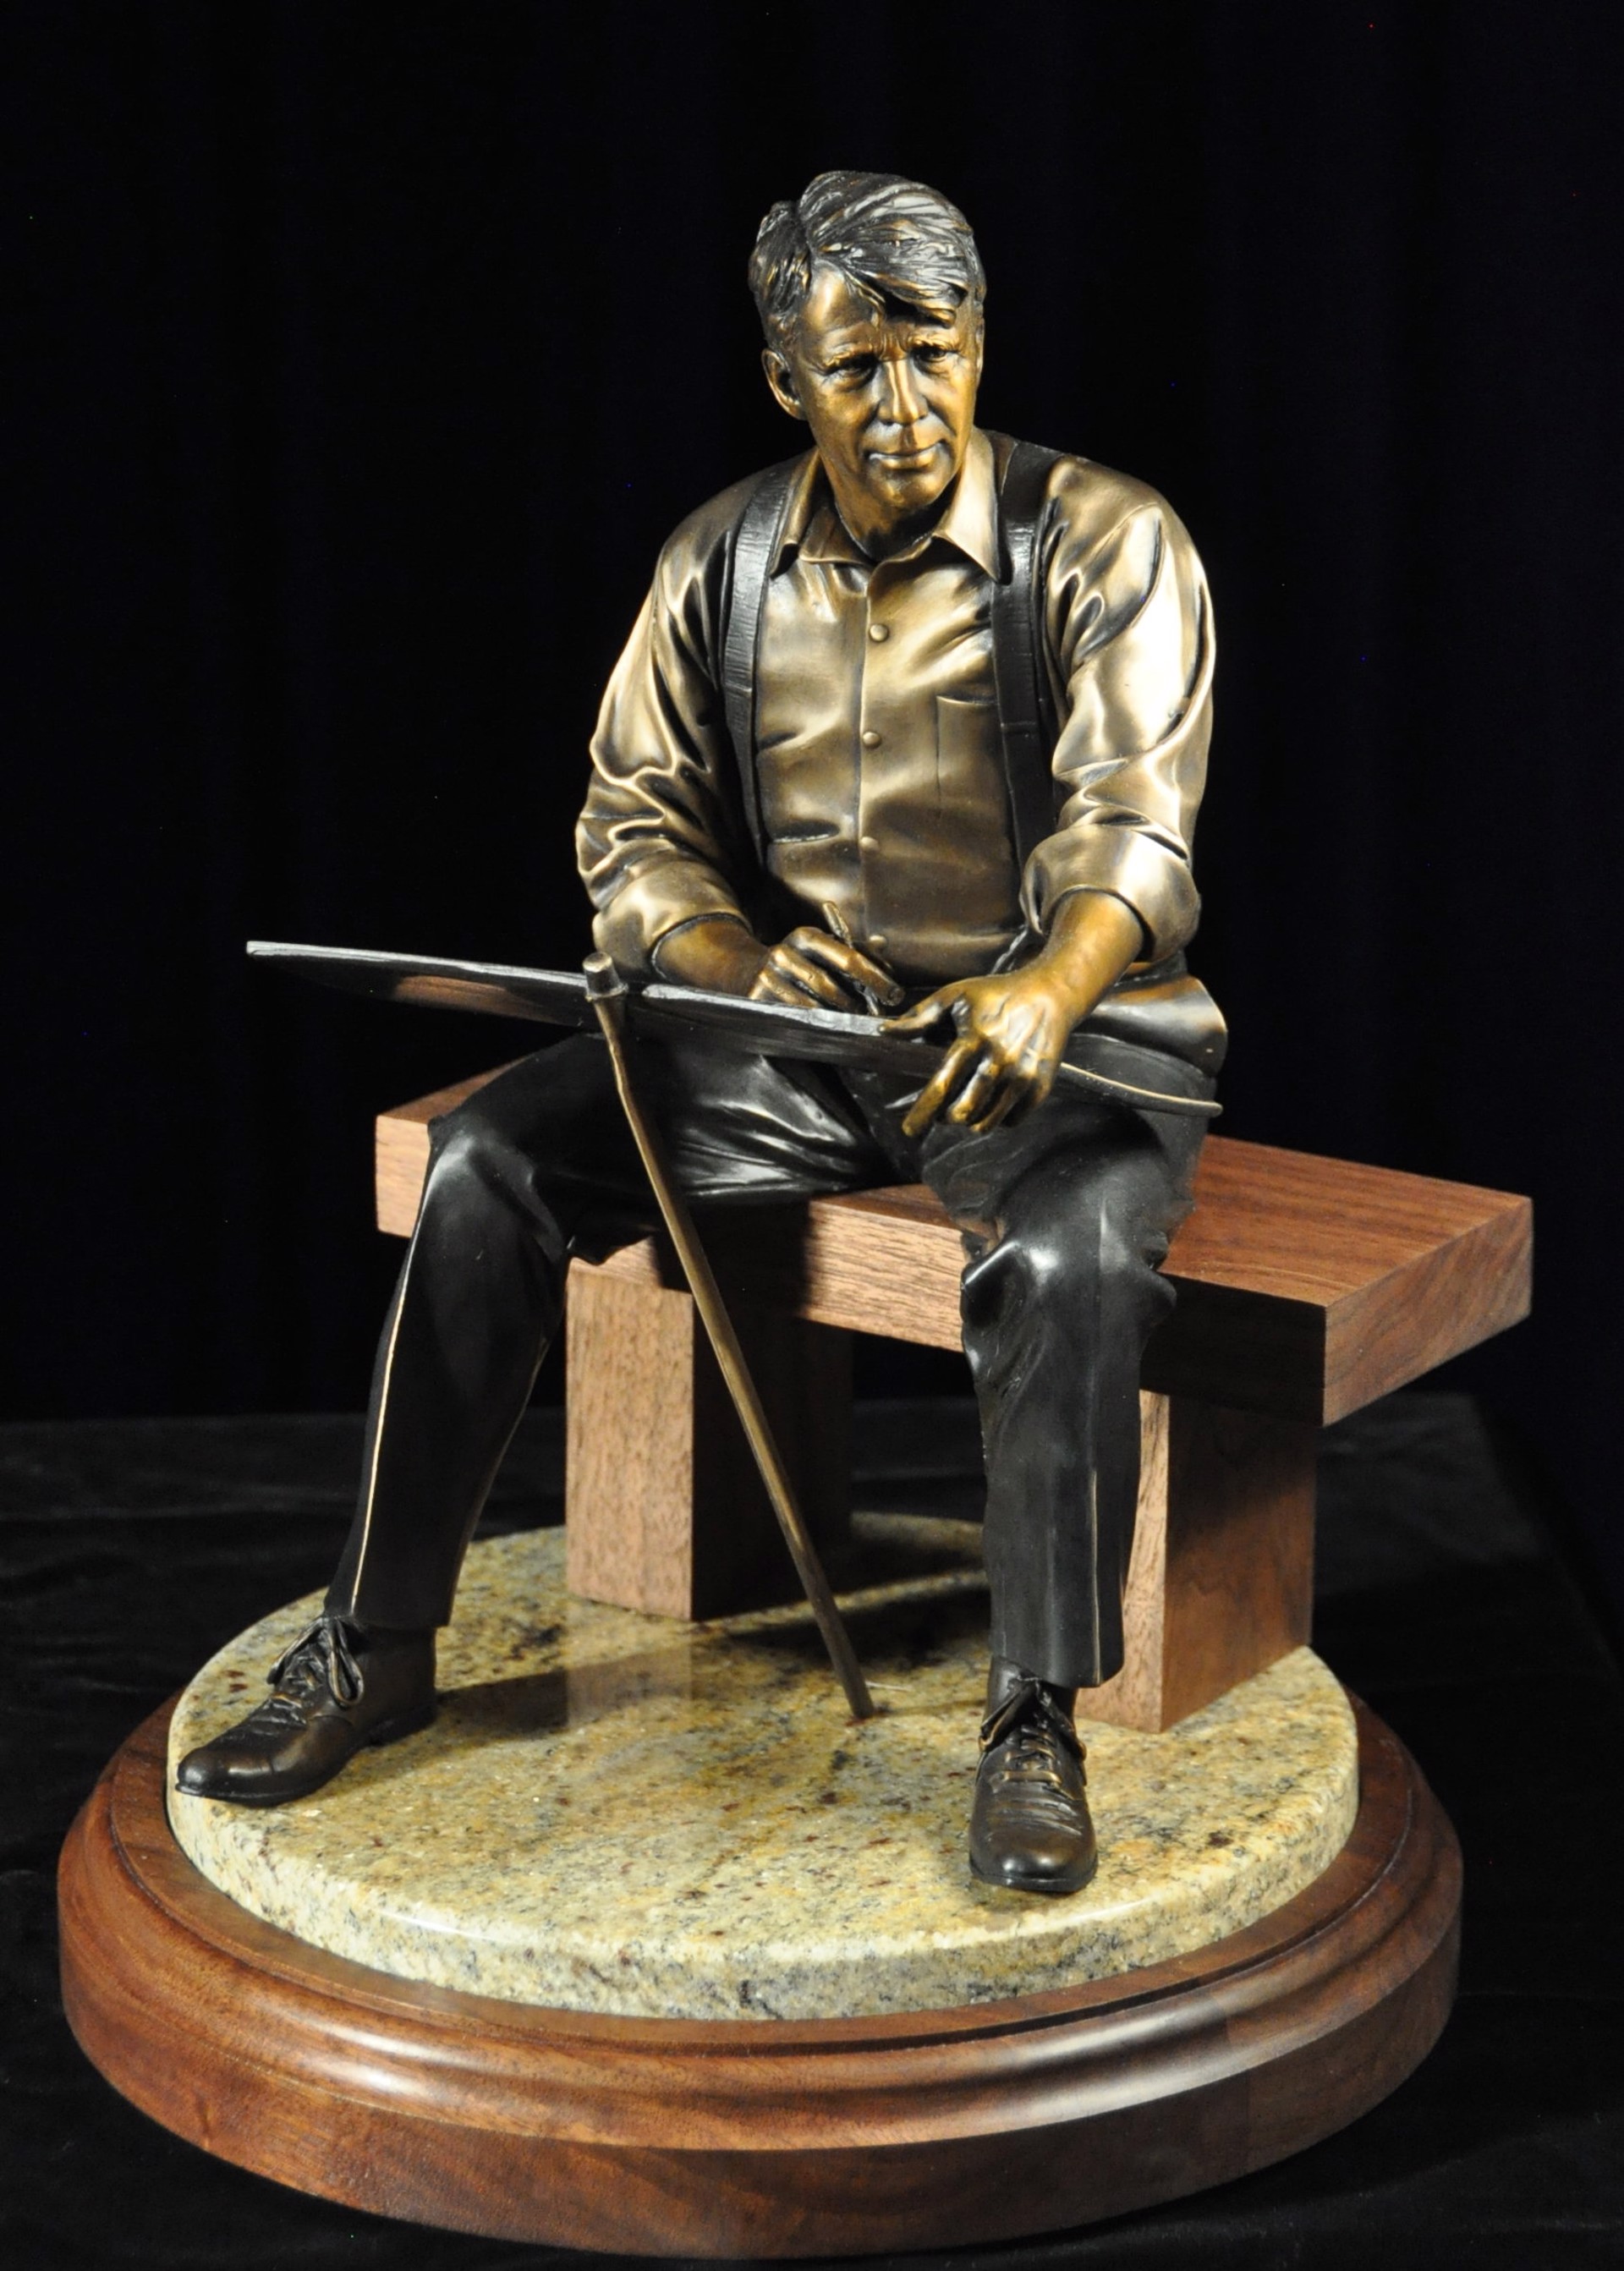 Robert Frost by George Lundeen